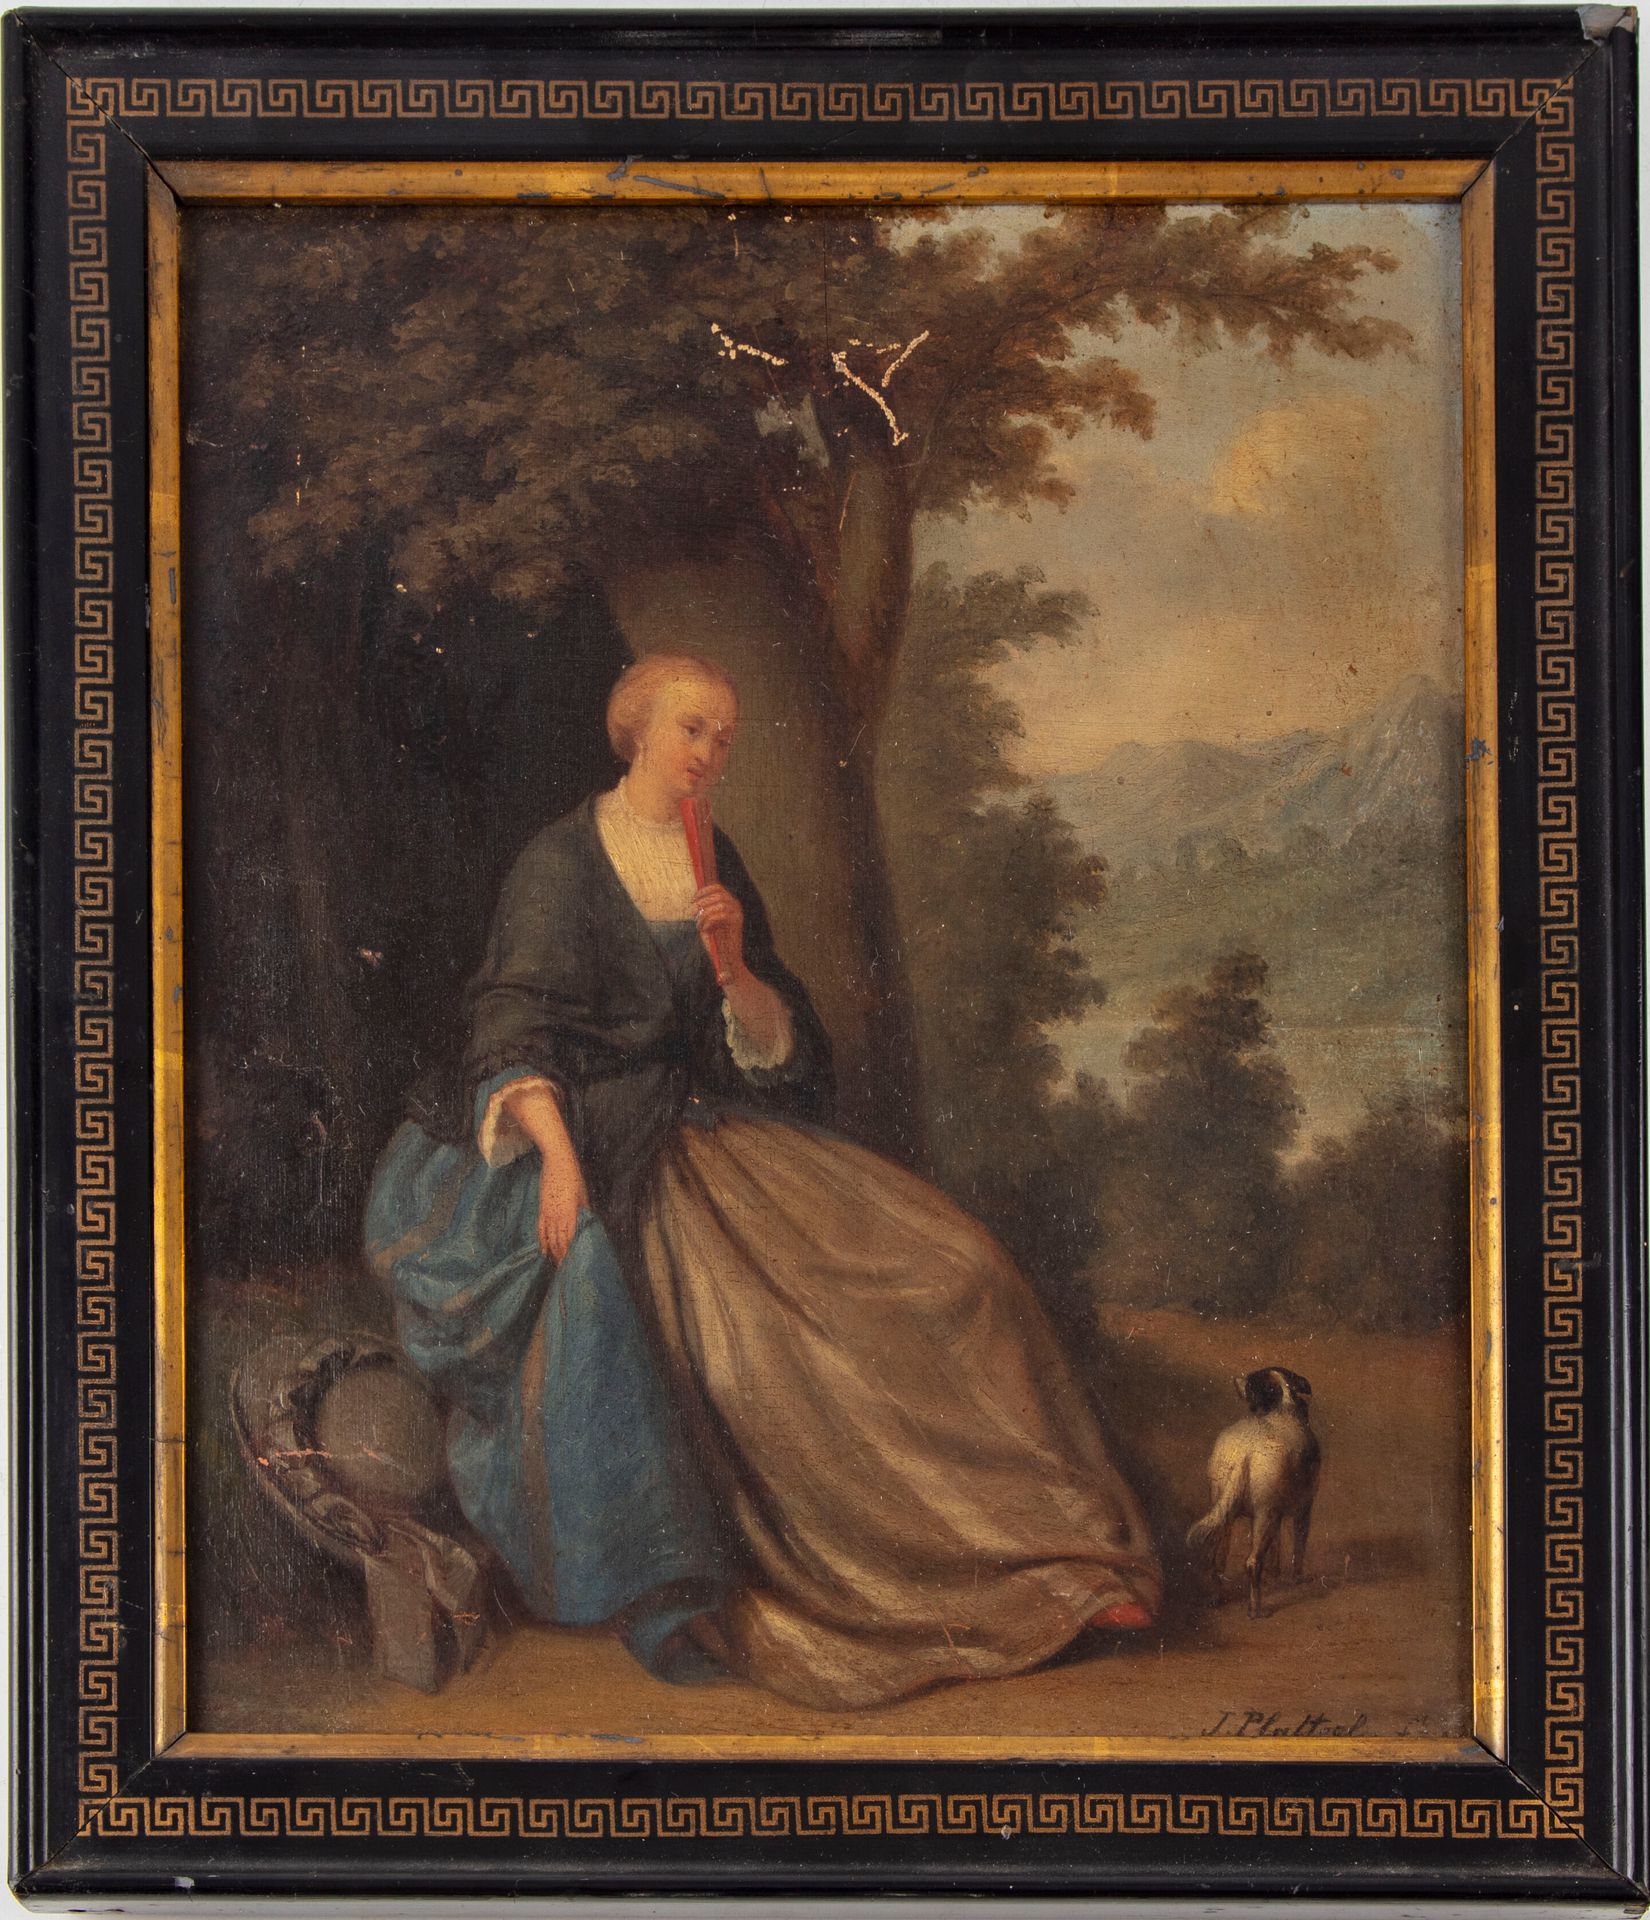 PLATTEEL J. PLATTEEL - 19th century

Lady of quality with a dog

Oil on panel, s&hellip;